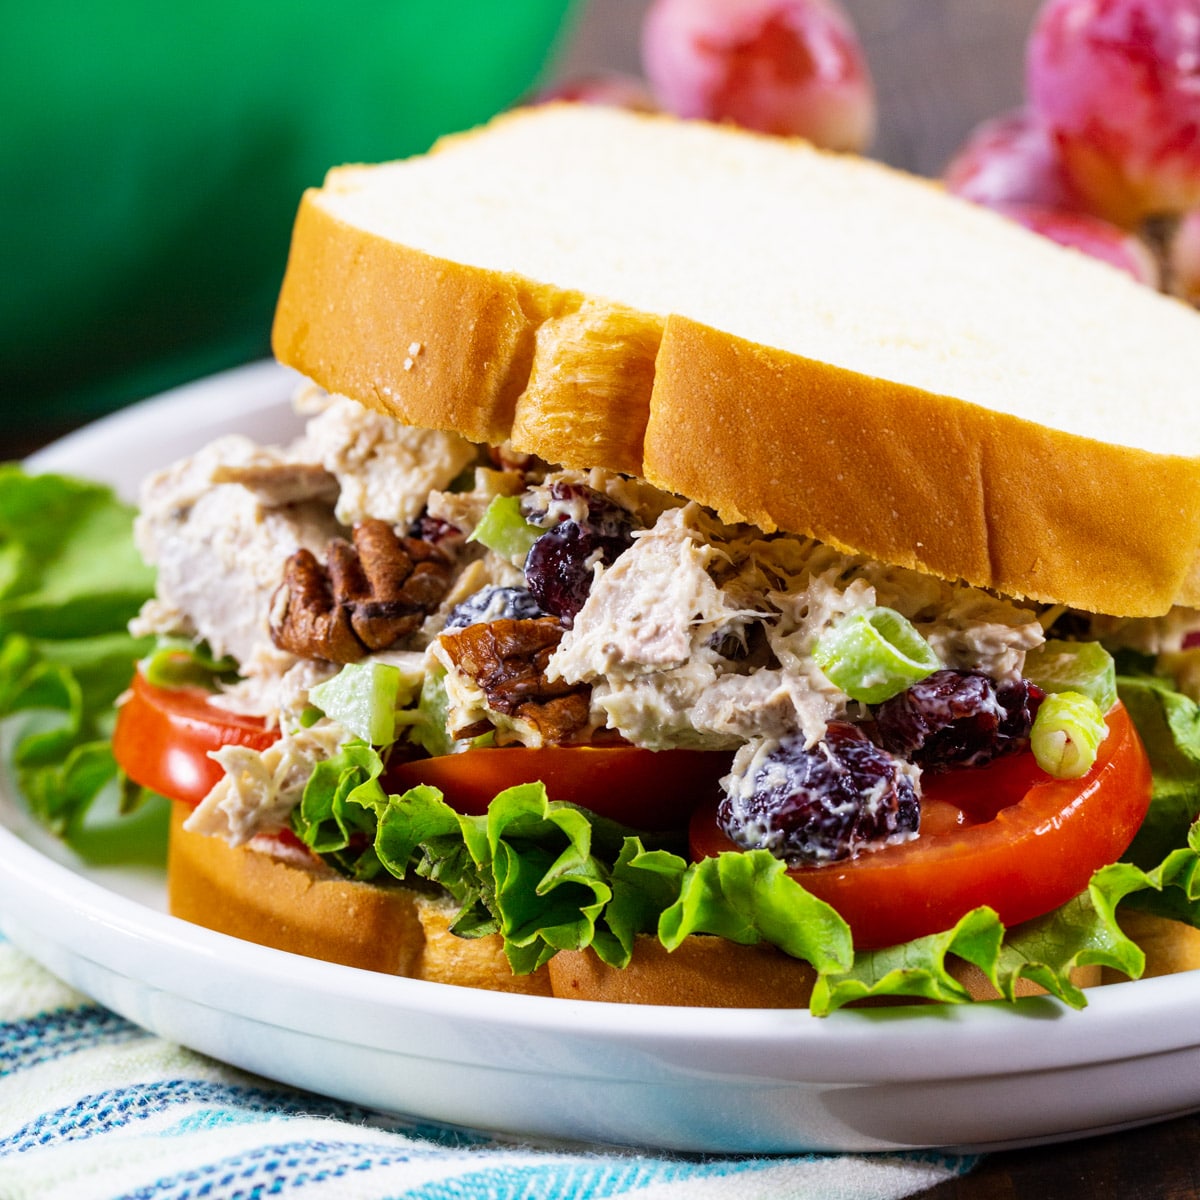 Turkey Salad in a sandwich with lettuce and tomato.